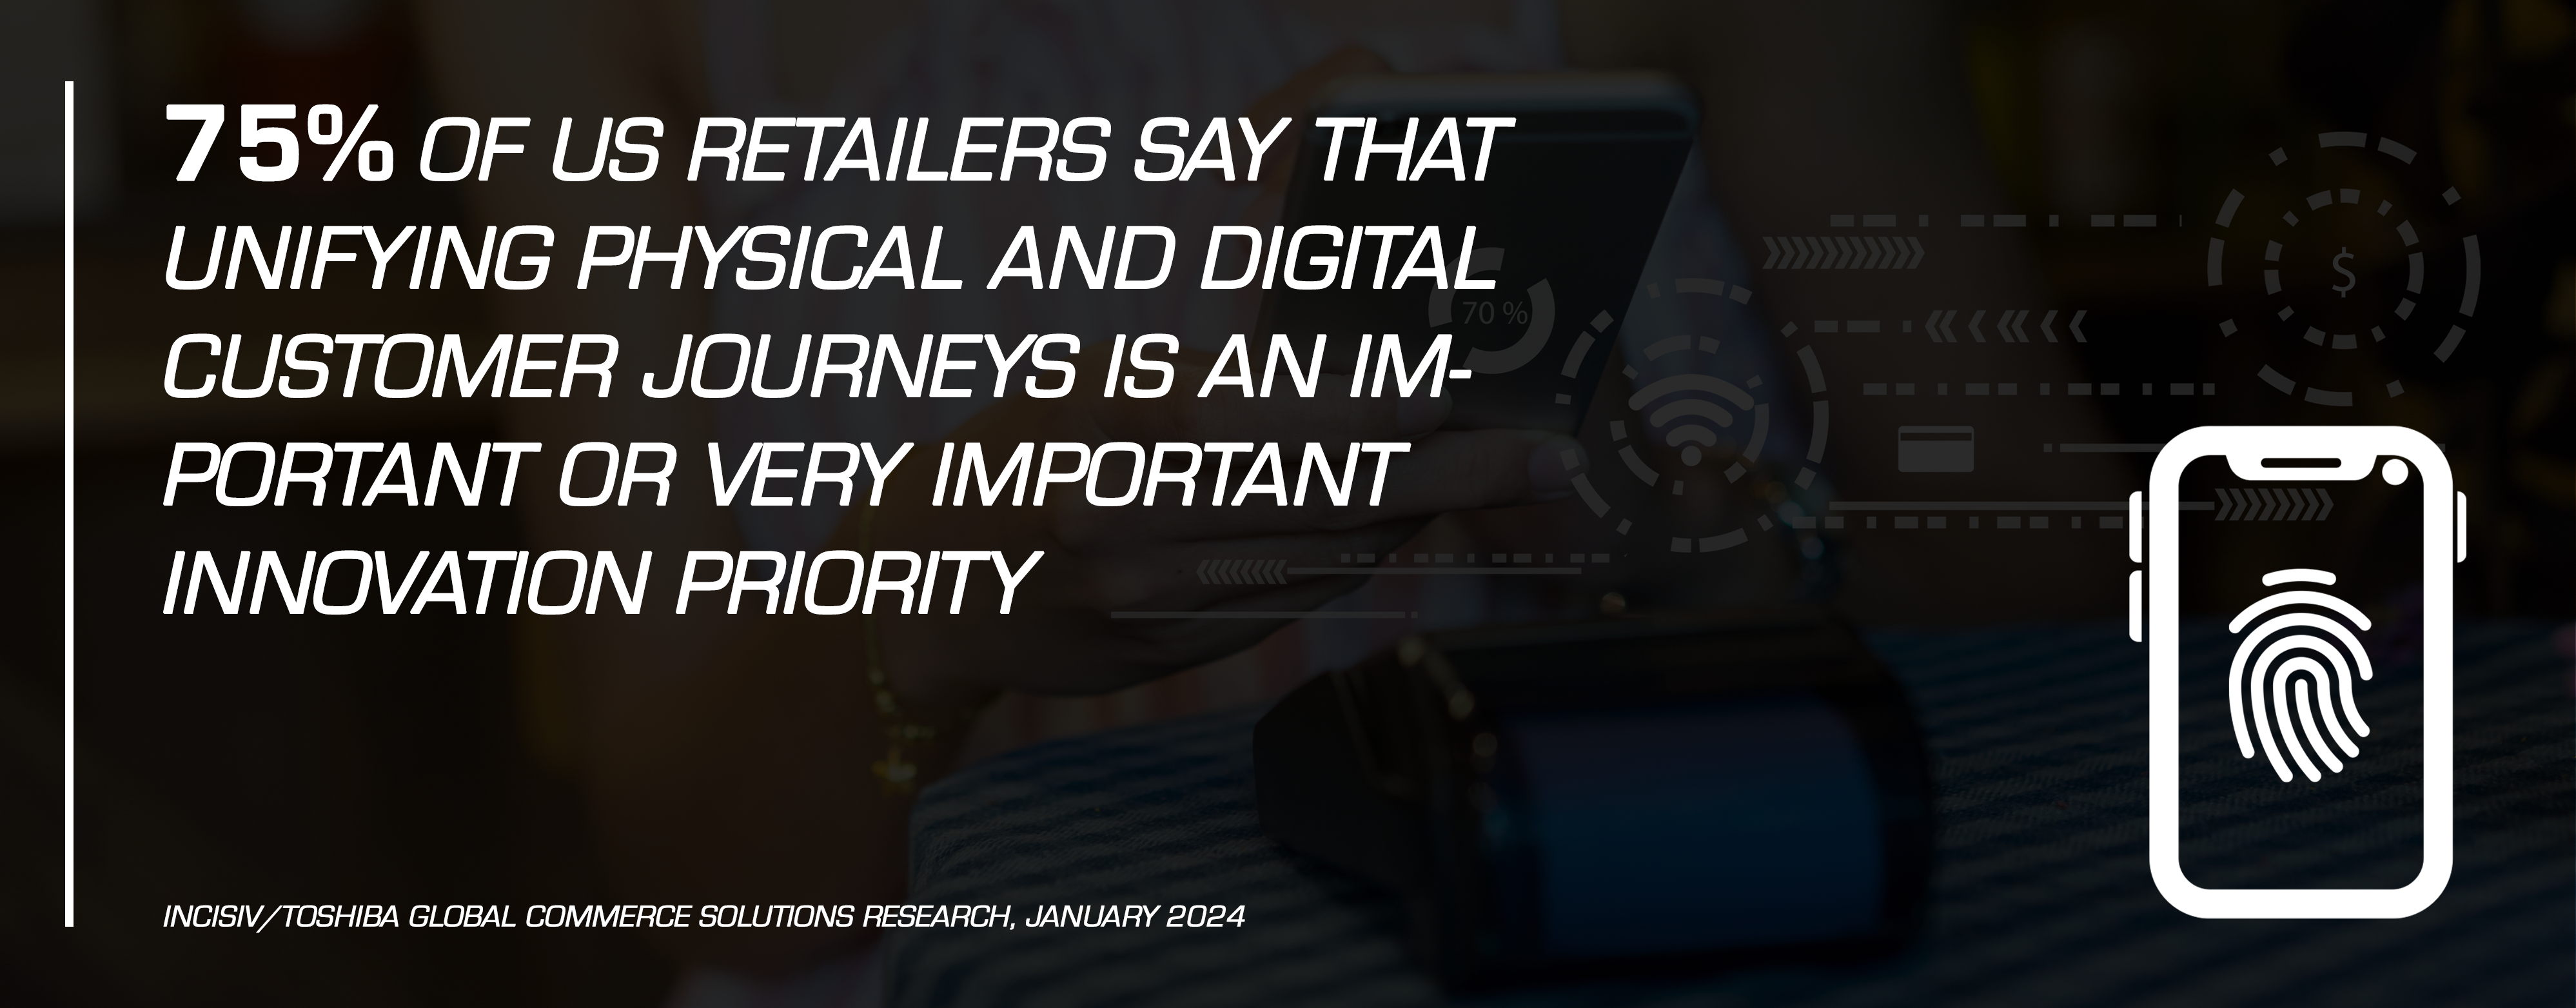 75% of us retailers say that unifying physical and digital customer journey